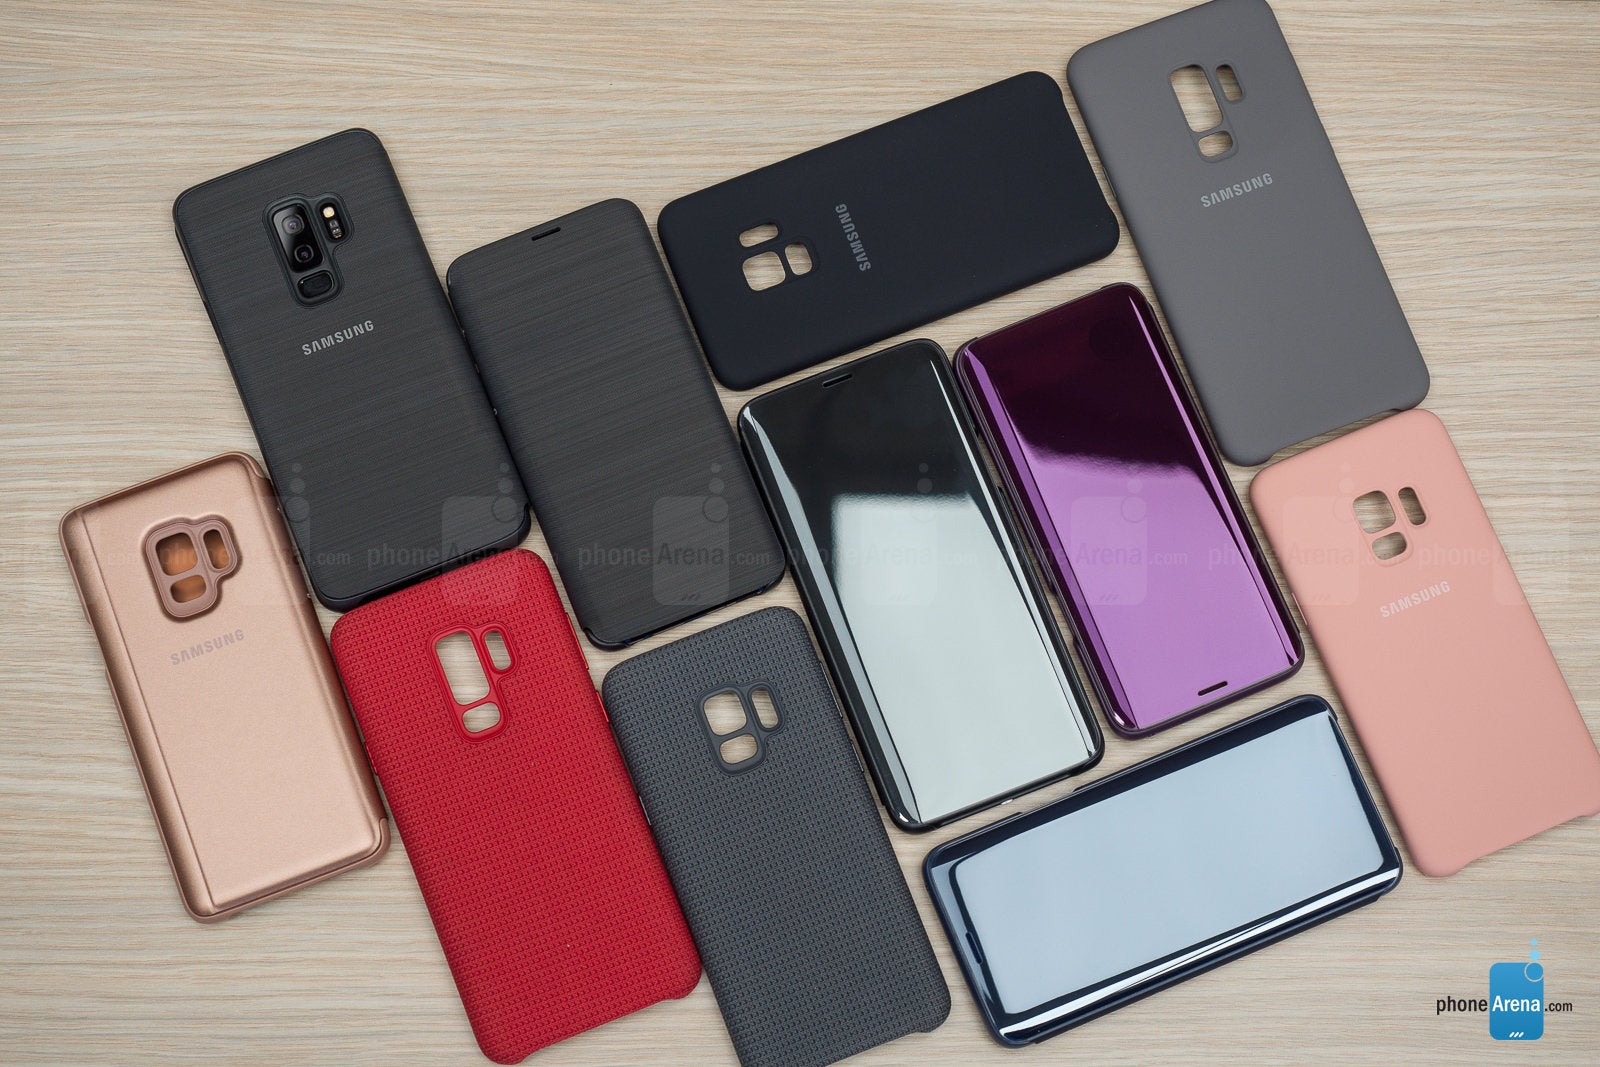 Best Samsung Galaxy S9 and S9+ cases: Top picks in every style